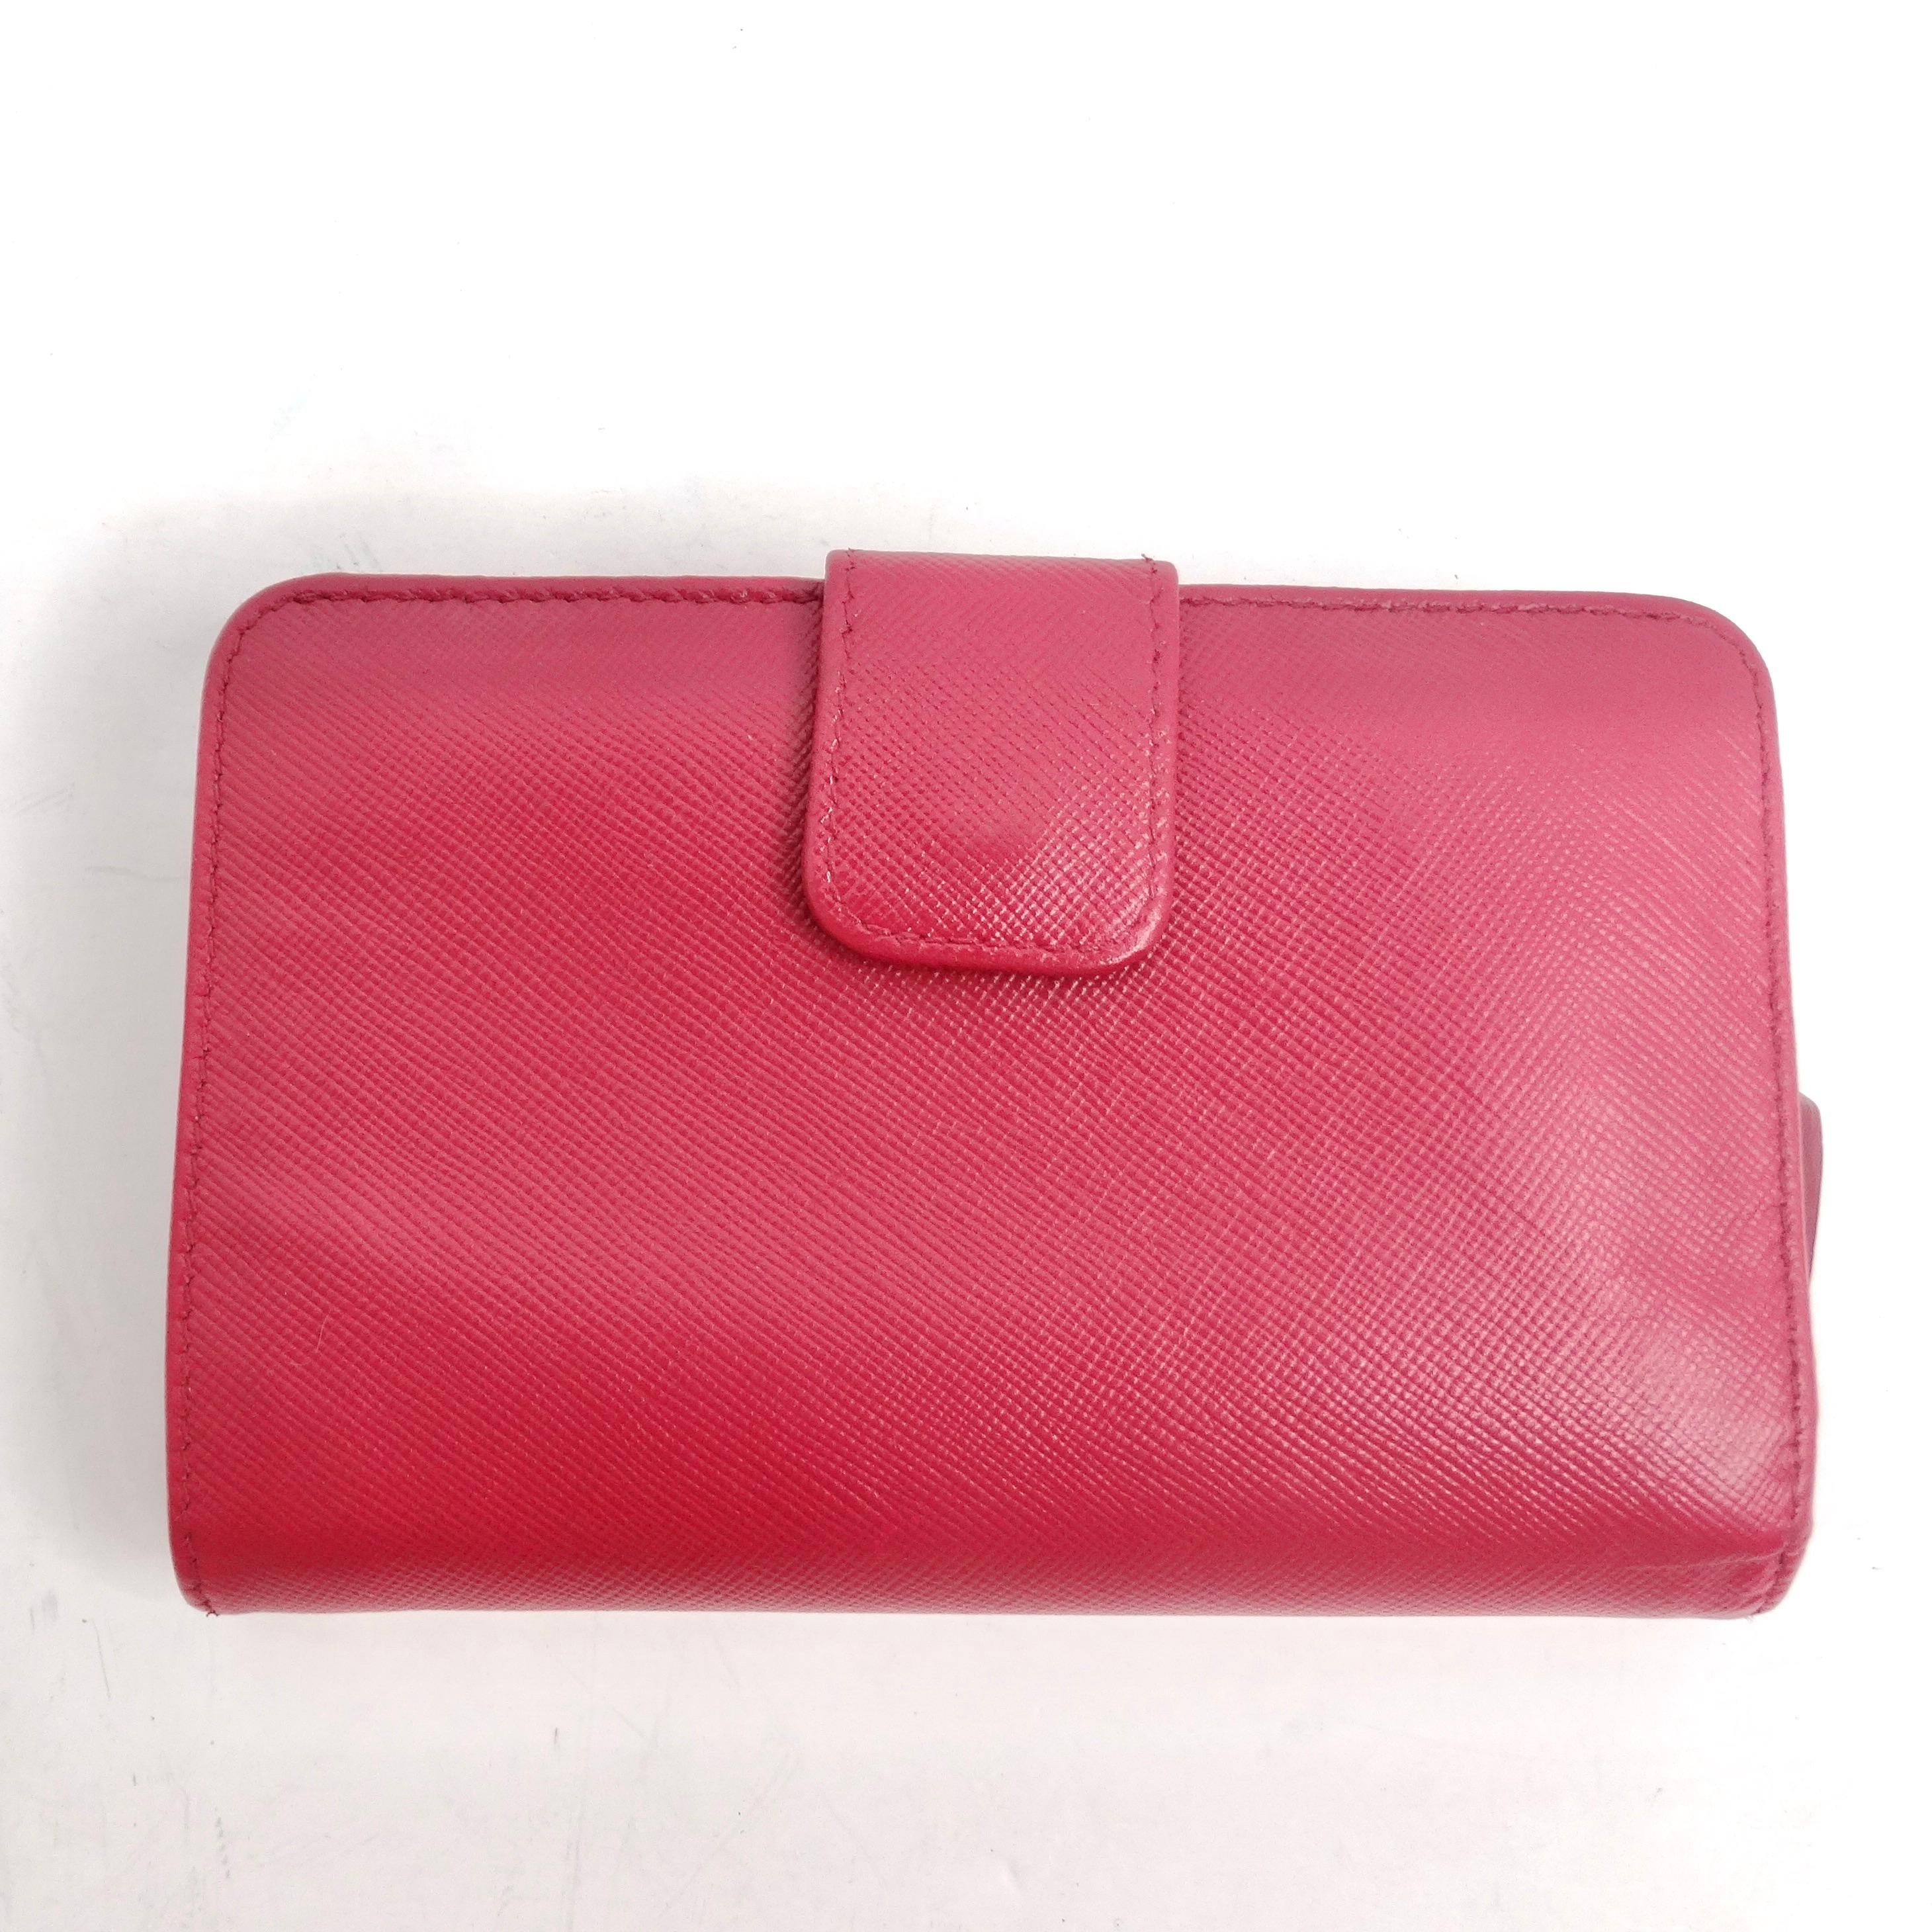 Prada Saffiano Leather Compact Wallet Pink For Sale 6